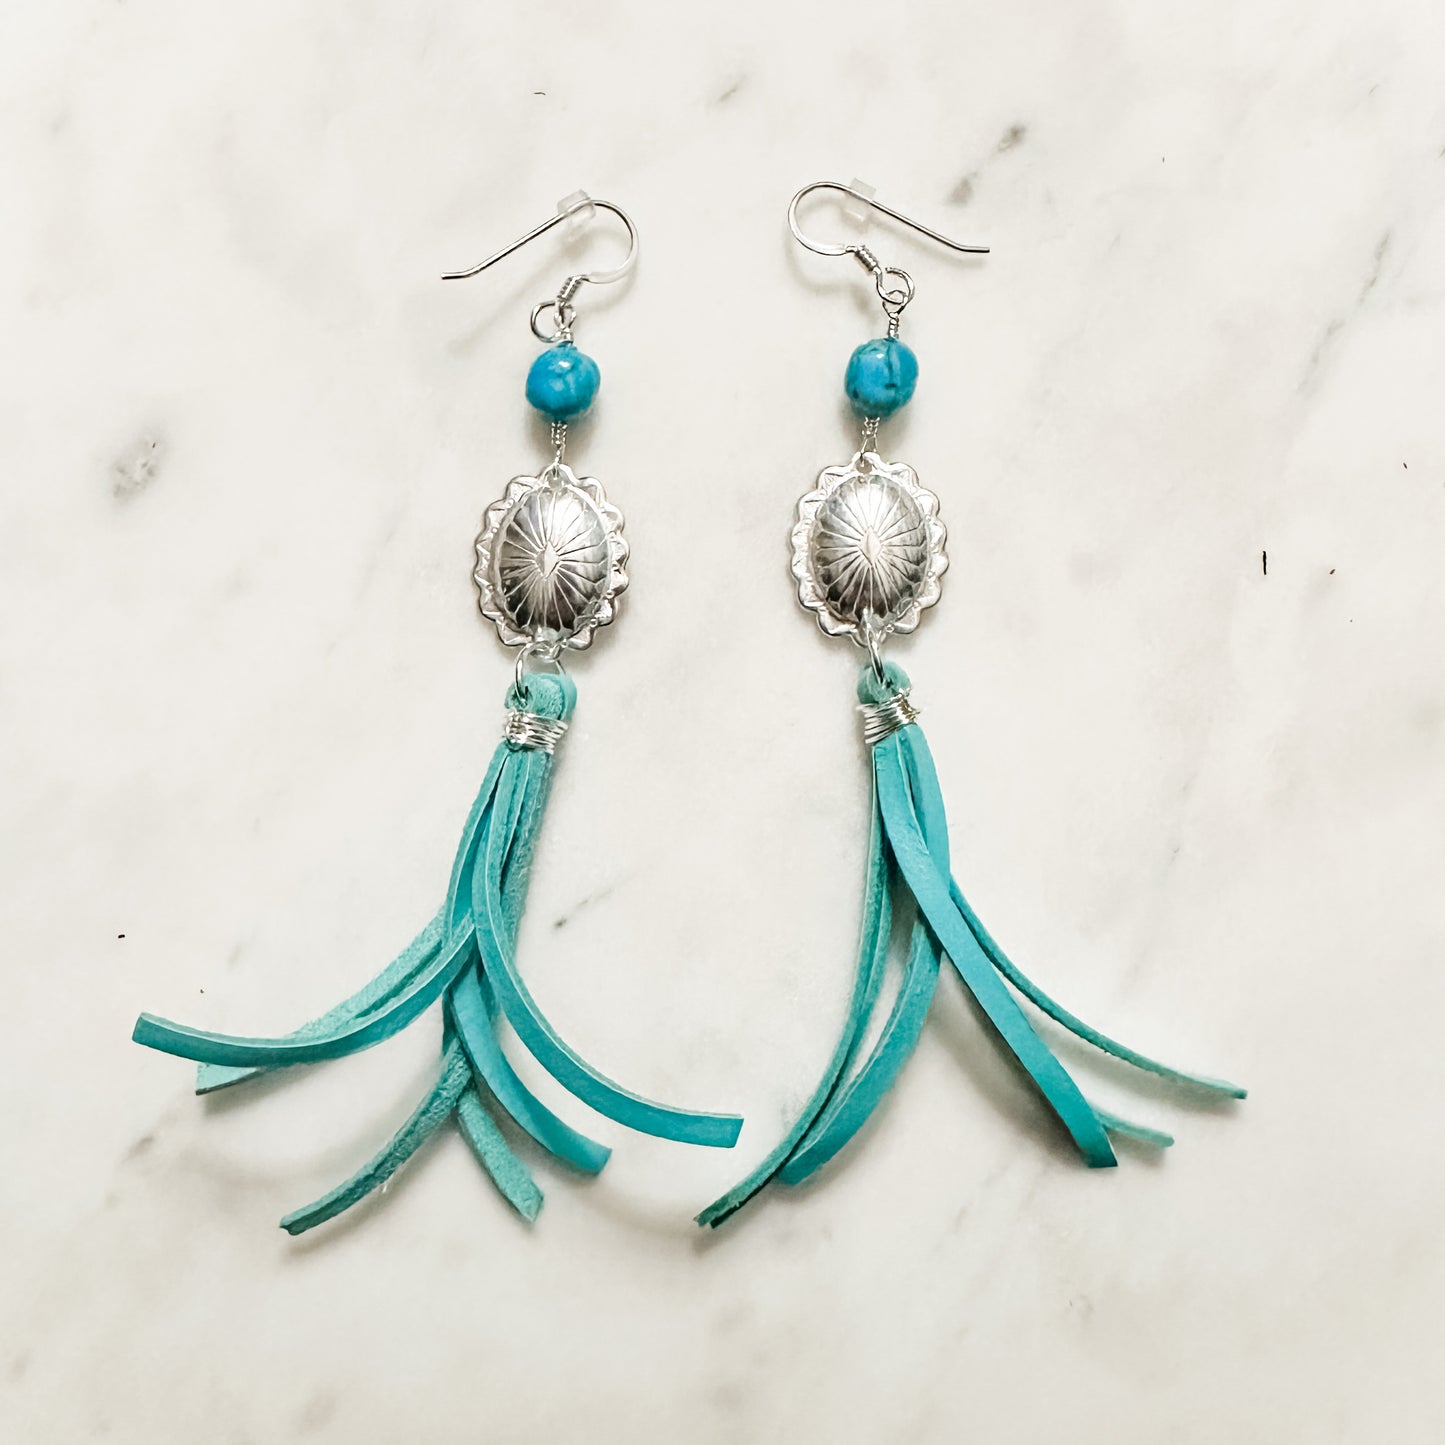 Concho and Turquoise Earrings with Leather Fringe - Quetzal